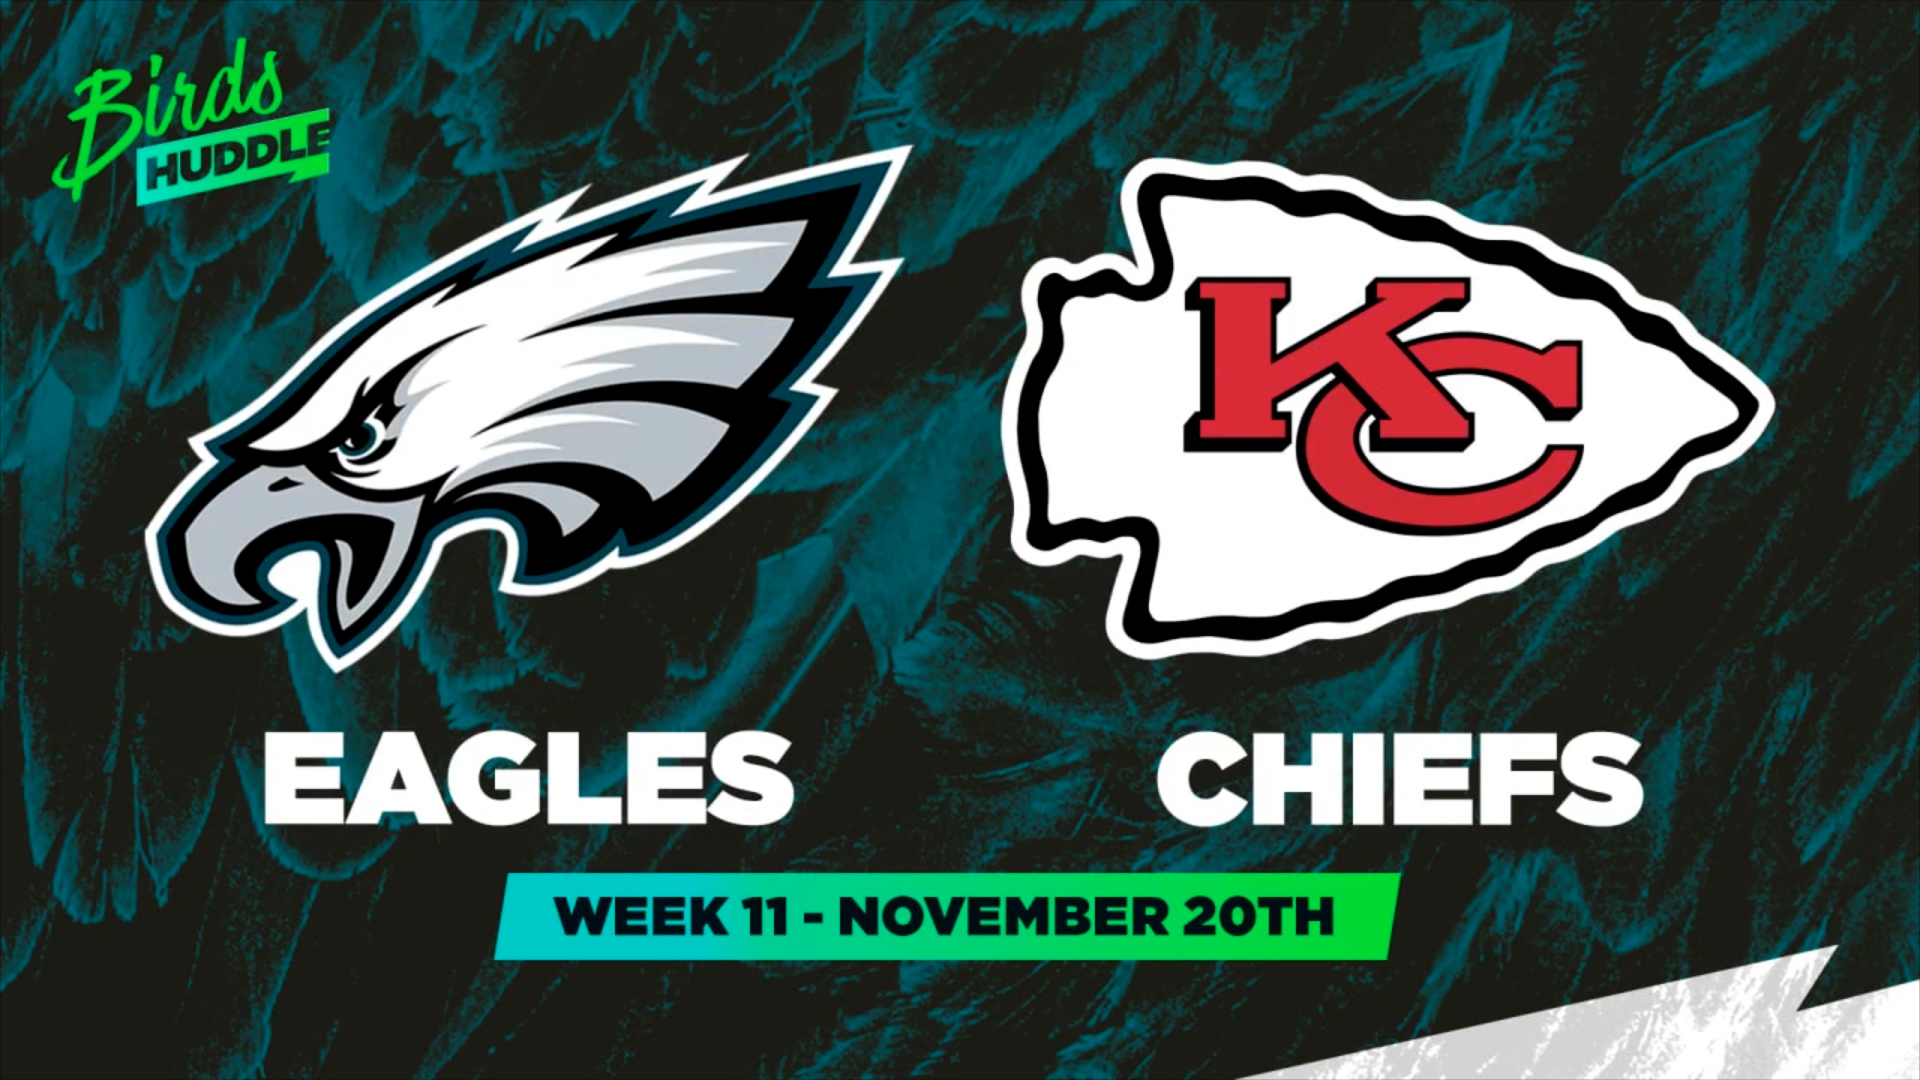 Chiefs will host Eagles on Monday night in Week 11 - NBC Sports